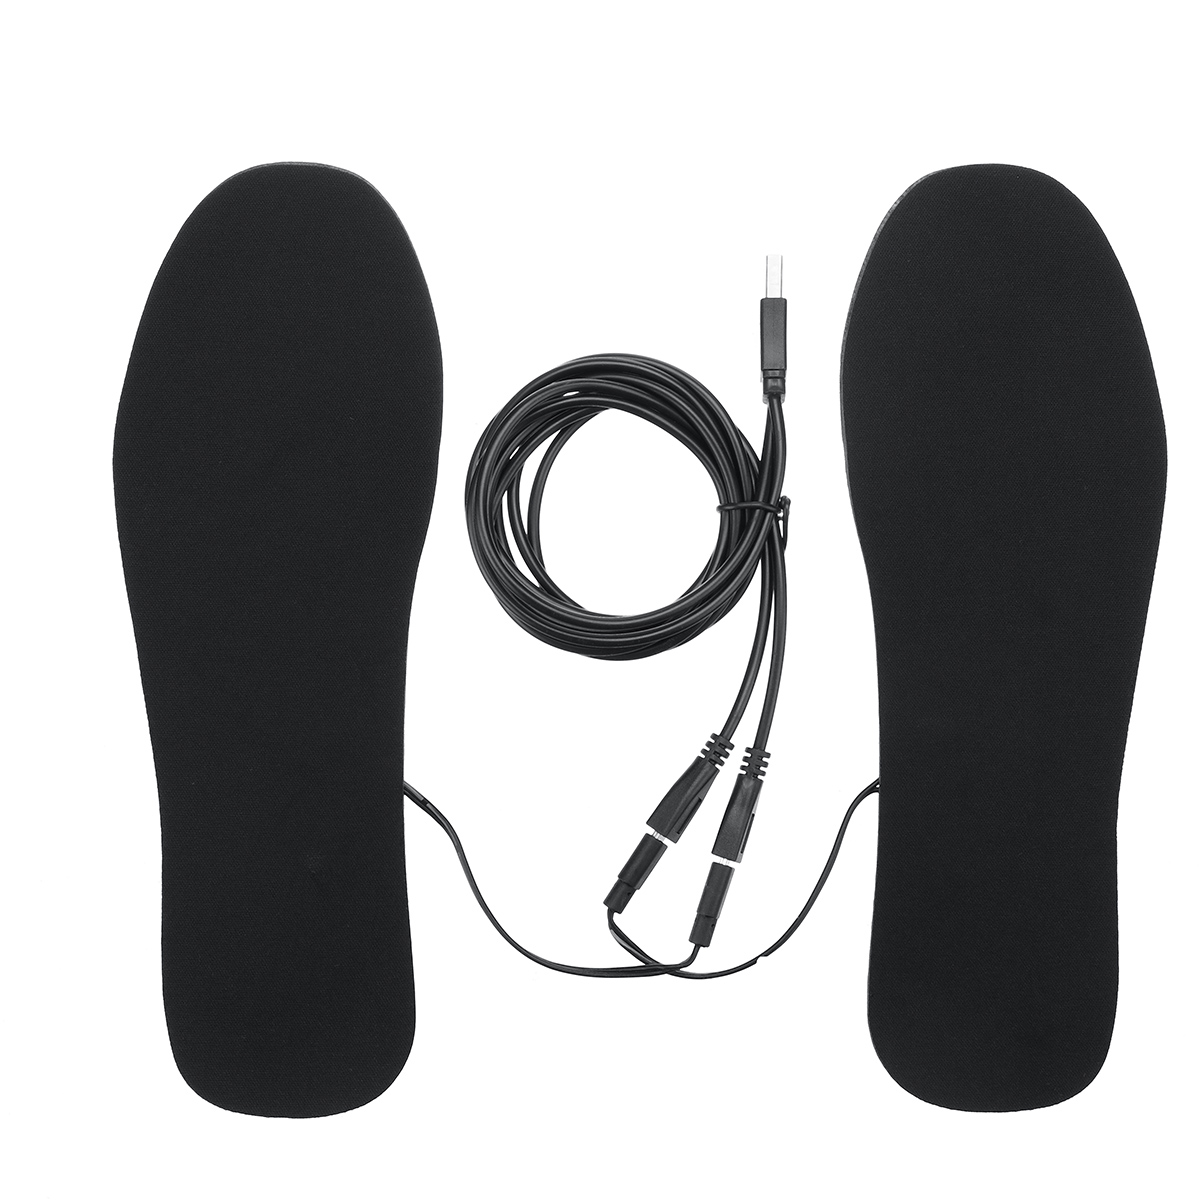 USB-Electric-Heated-Shoe-Insoles-Electric-Film-Feet-Heater-Outdoor-Warm-Socks-Pads-Winter-Sports-Acc-1809982-5